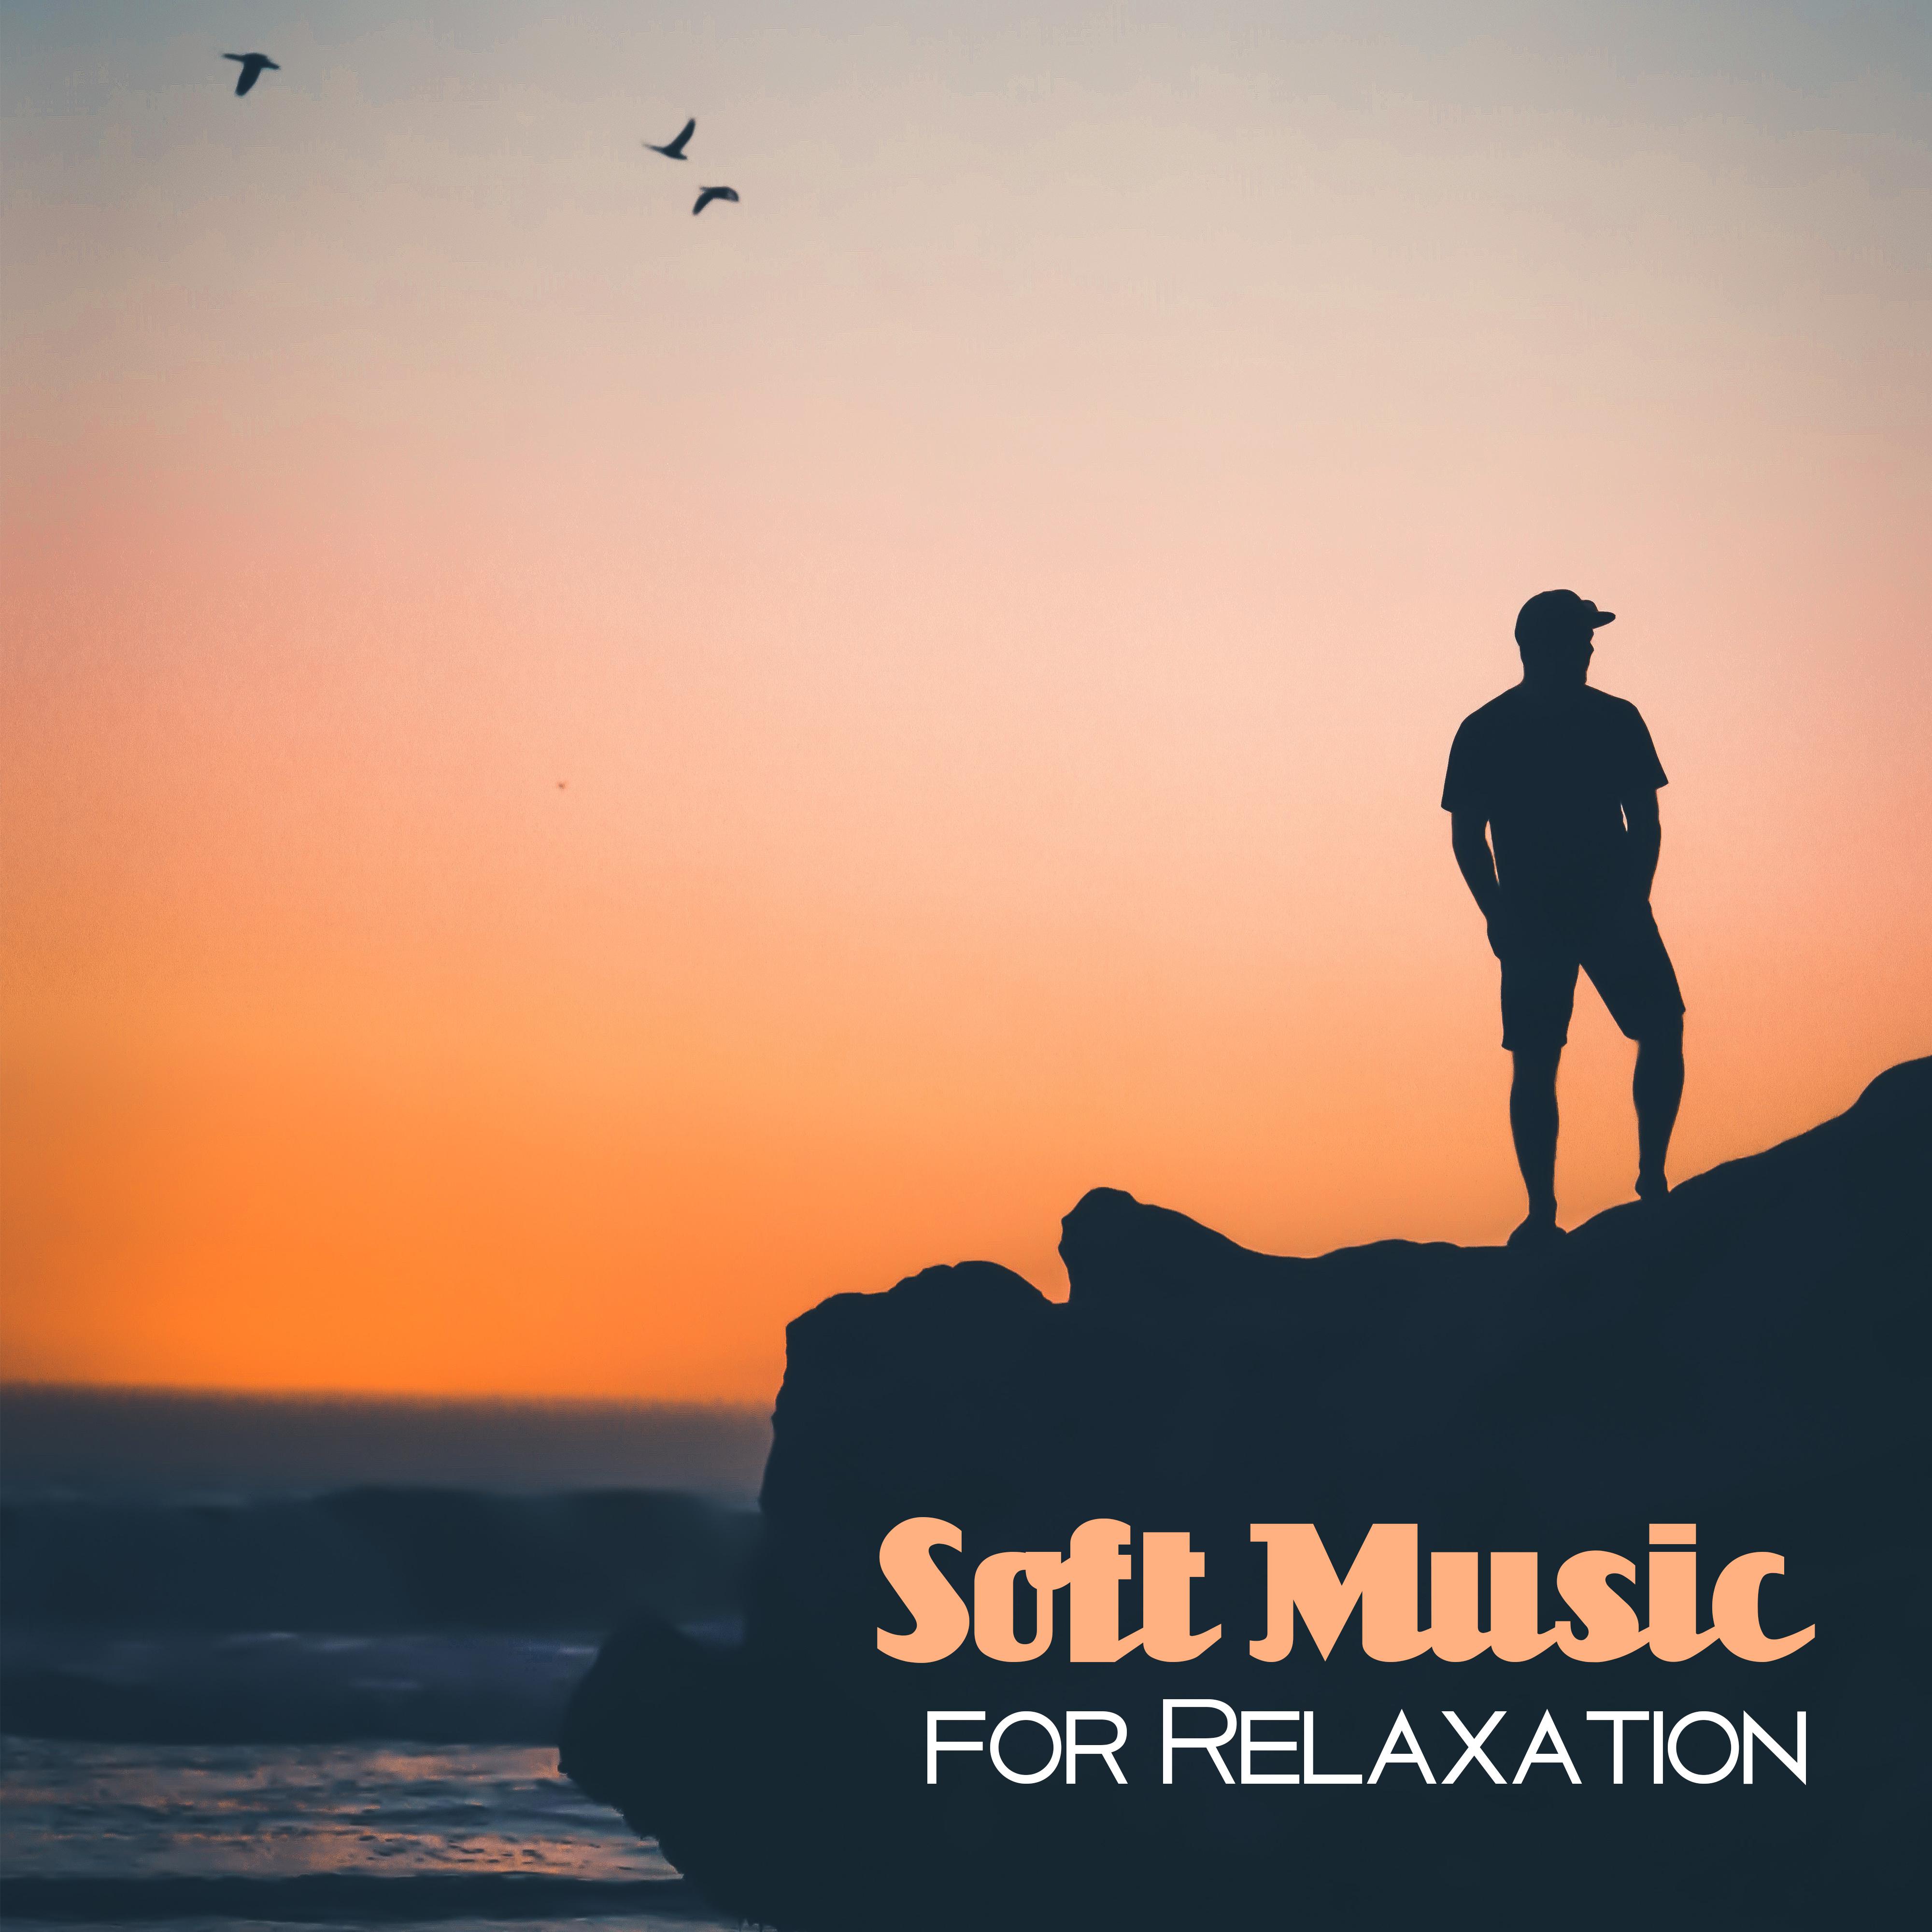 Soft Music for Relaxation – Easy Listening, Peaceful Melodies, Stress Relief, New Age Music, Healing Therapy